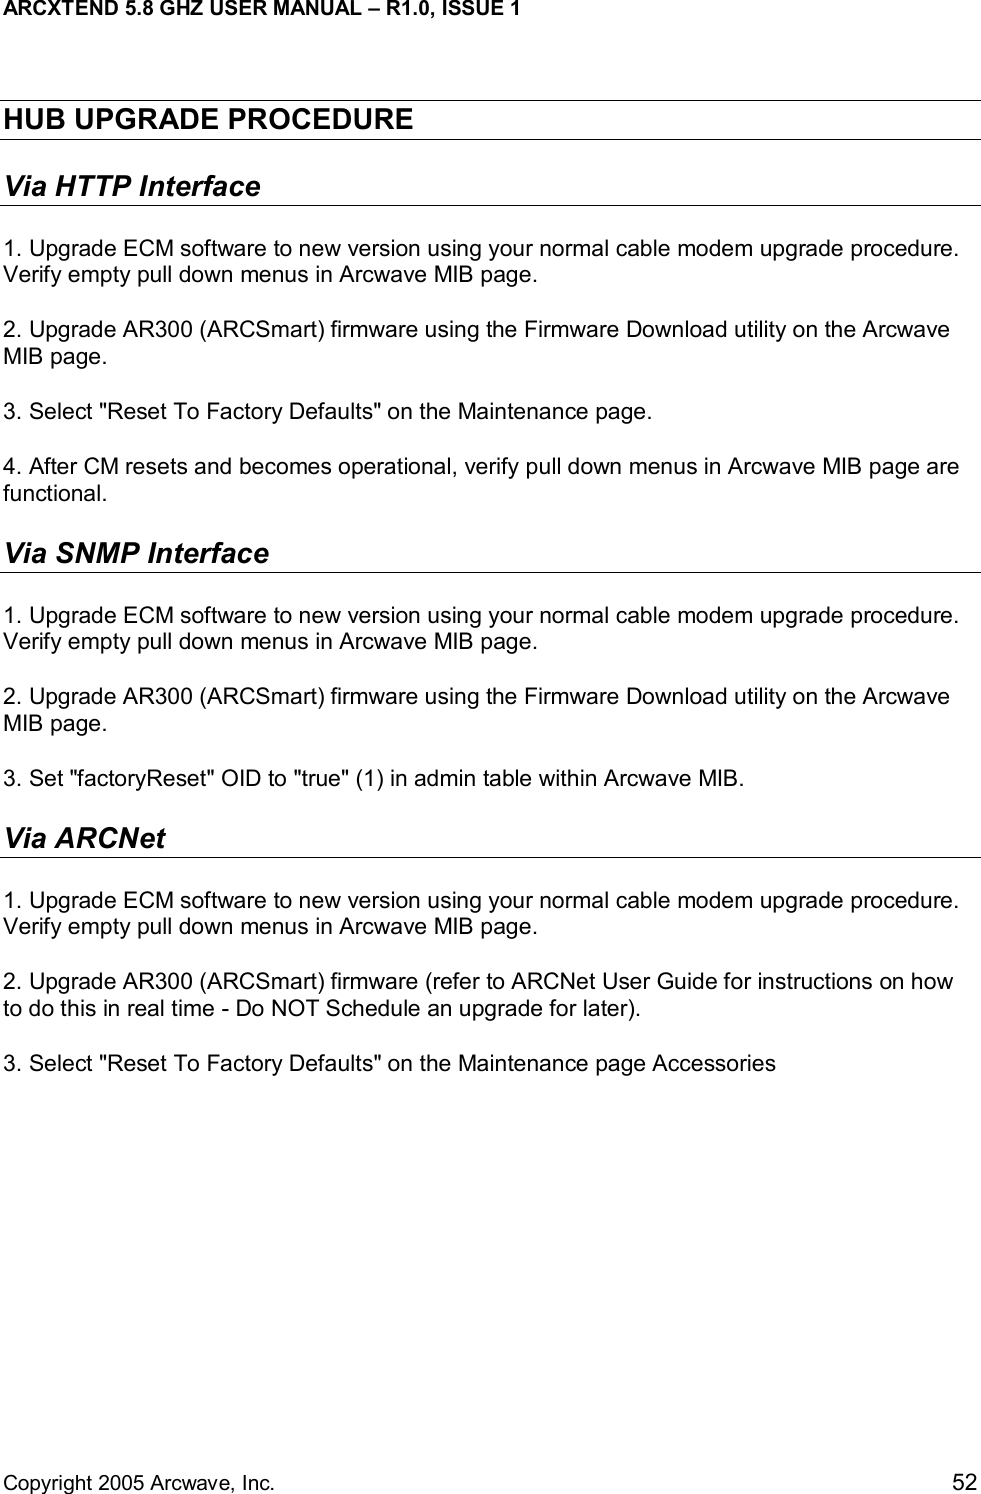 ARCXTEND 5.8 GHZ USER MANUAL – R1.0, ISSUE 1  Copyright 2005 Arcwave, Inc.    52 HUB UPGRADE PROCEDURE Via HTTP Interface 1. Upgrade ECM software to new version using your normal cable modem upgrade procedure. Verify empty pull down menus in Arcwave MIB page. 2. Upgrade AR300 (ARCSmart) firmware using the Firmware Download utility on the Arcwave MIB page.   3. Select &quot;Reset To Factory Defaults&quot; on the Maintenance page. 4. After CM resets and becomes operational, verify pull down menus in Arcwave MIB page are functional. Via SNMP Interface 1. Upgrade ECM software to new version using your normal cable modem upgrade procedure. Verify empty pull down menus in Arcwave MIB page. 2. Upgrade AR300 (ARCSmart) firmware using the Firmware Download utility on the Arcwave MIB page.   3. Set &quot;factoryReset&quot; OID to &quot;true&quot; (1) in admin table within Arcwave MIB. Via ARCNet  1. Upgrade ECM software to new version using your normal cable modem upgrade procedure. Verify empty pull down menus in Arcwave MIB page. 2. Upgrade AR300 (ARCSmart) firmware (refer to ARCNet User Guide for instructions on how to do this in real time - Do NOT Schedule an upgrade for later). 3. Select &quot;Reset To Factory Defaults&quot; on the Maintenance page Accessories 